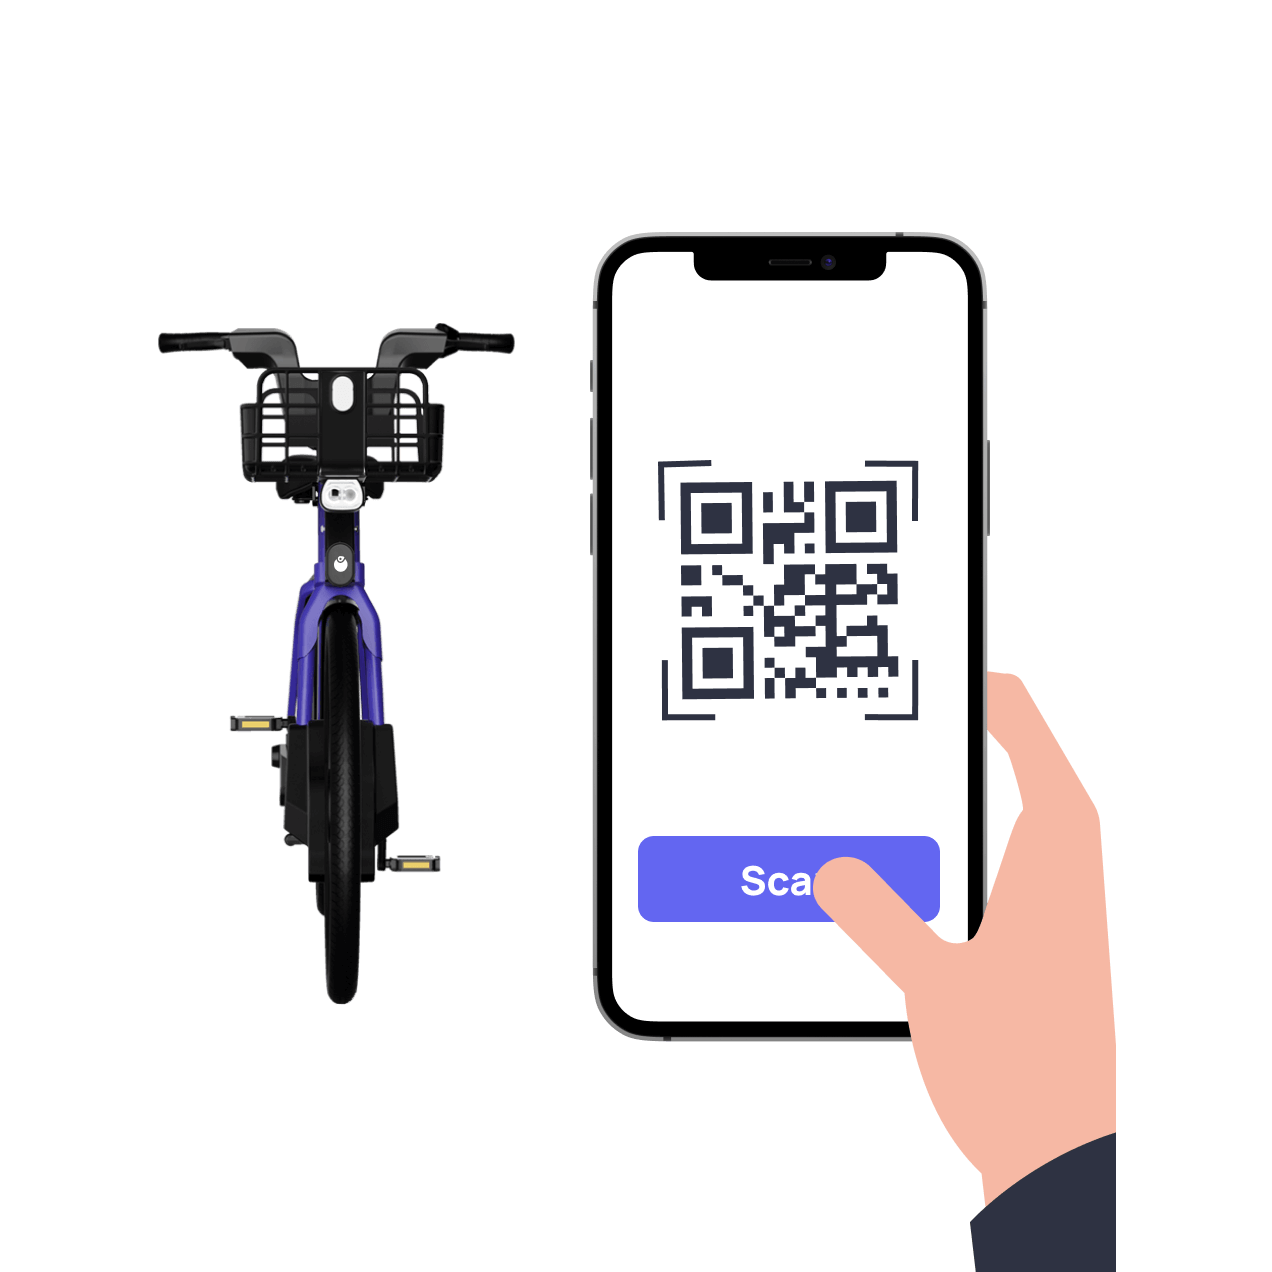 Image of Plum e-bike on the left, illustration of hand holding phone with QR code and 'Scan' button on the right